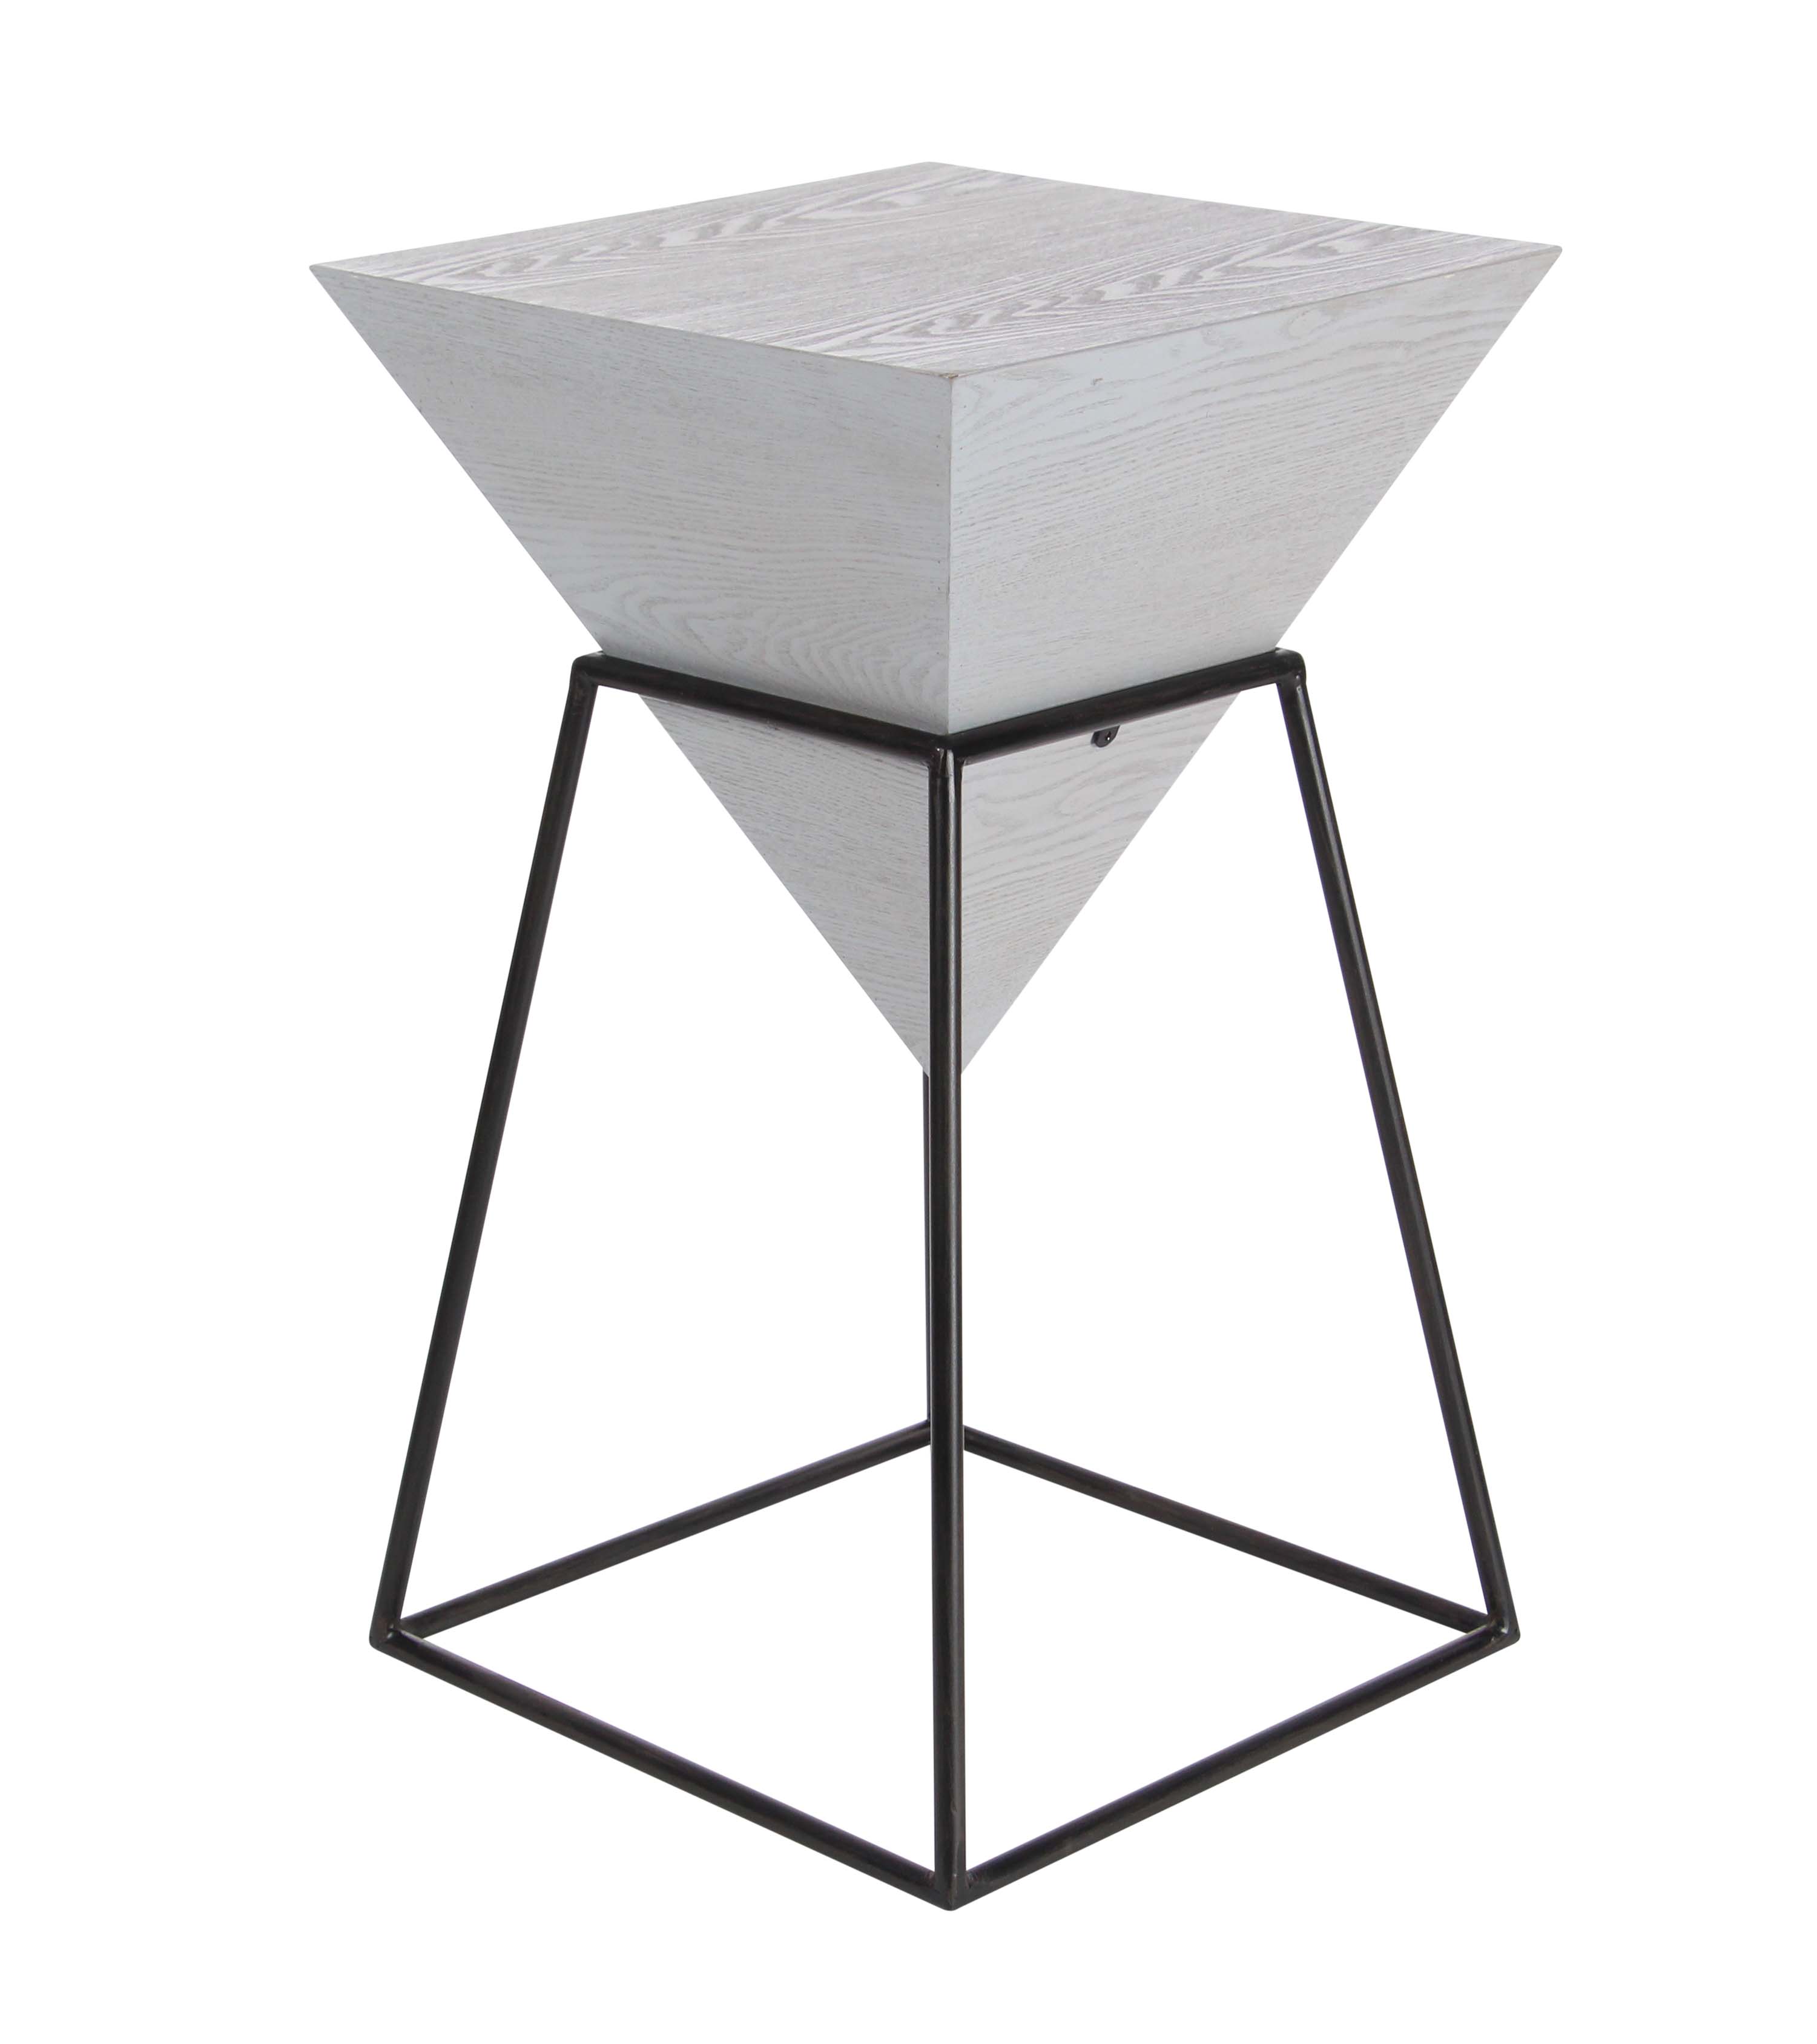 decmode modern inch white wood and metal pyramid accent table how met your mother umbrella solid oak threshold piece coffee set hiend accents imitation designer furniture high top